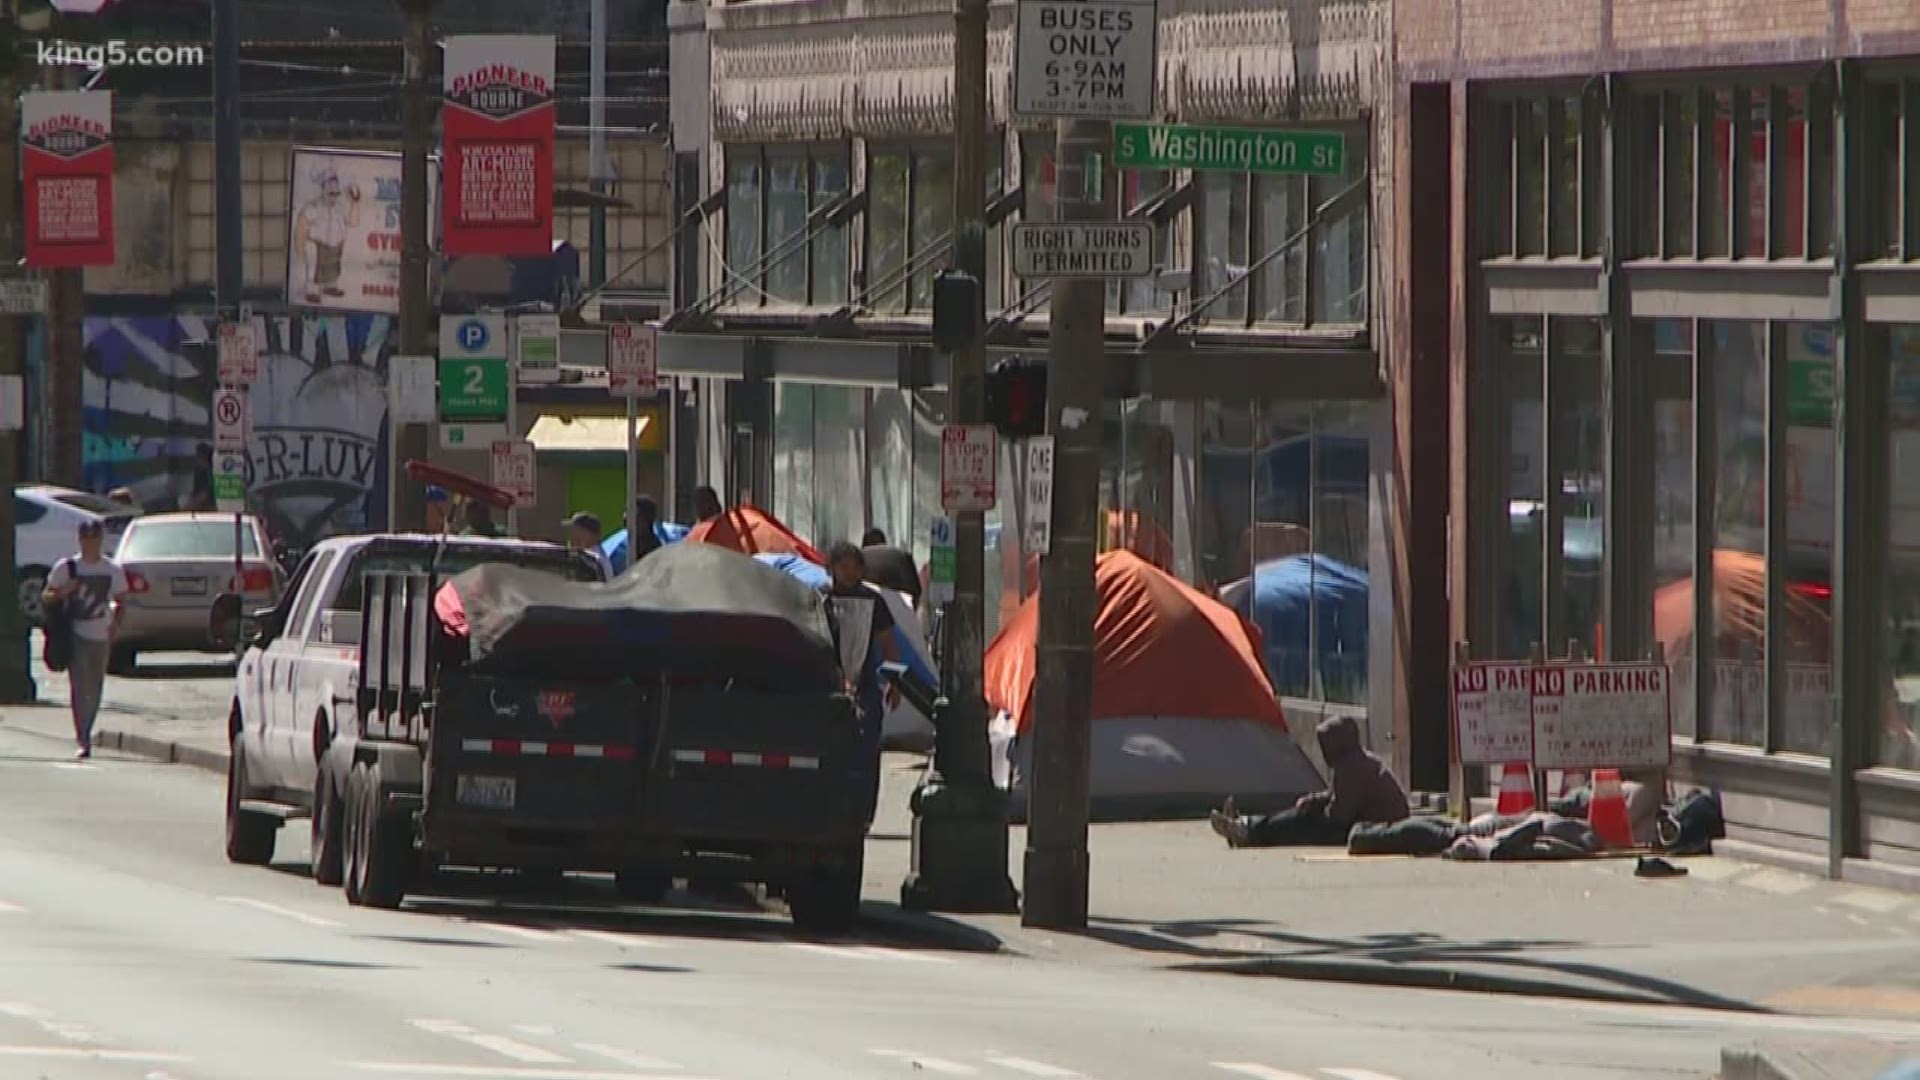 A recent survey showed King County's homeless population dropped this year compared with last year. But within that encouraging headline, there is a troubling increase, which reveals more about who is impacted by homelessness. KING 5's Ted Land reports.